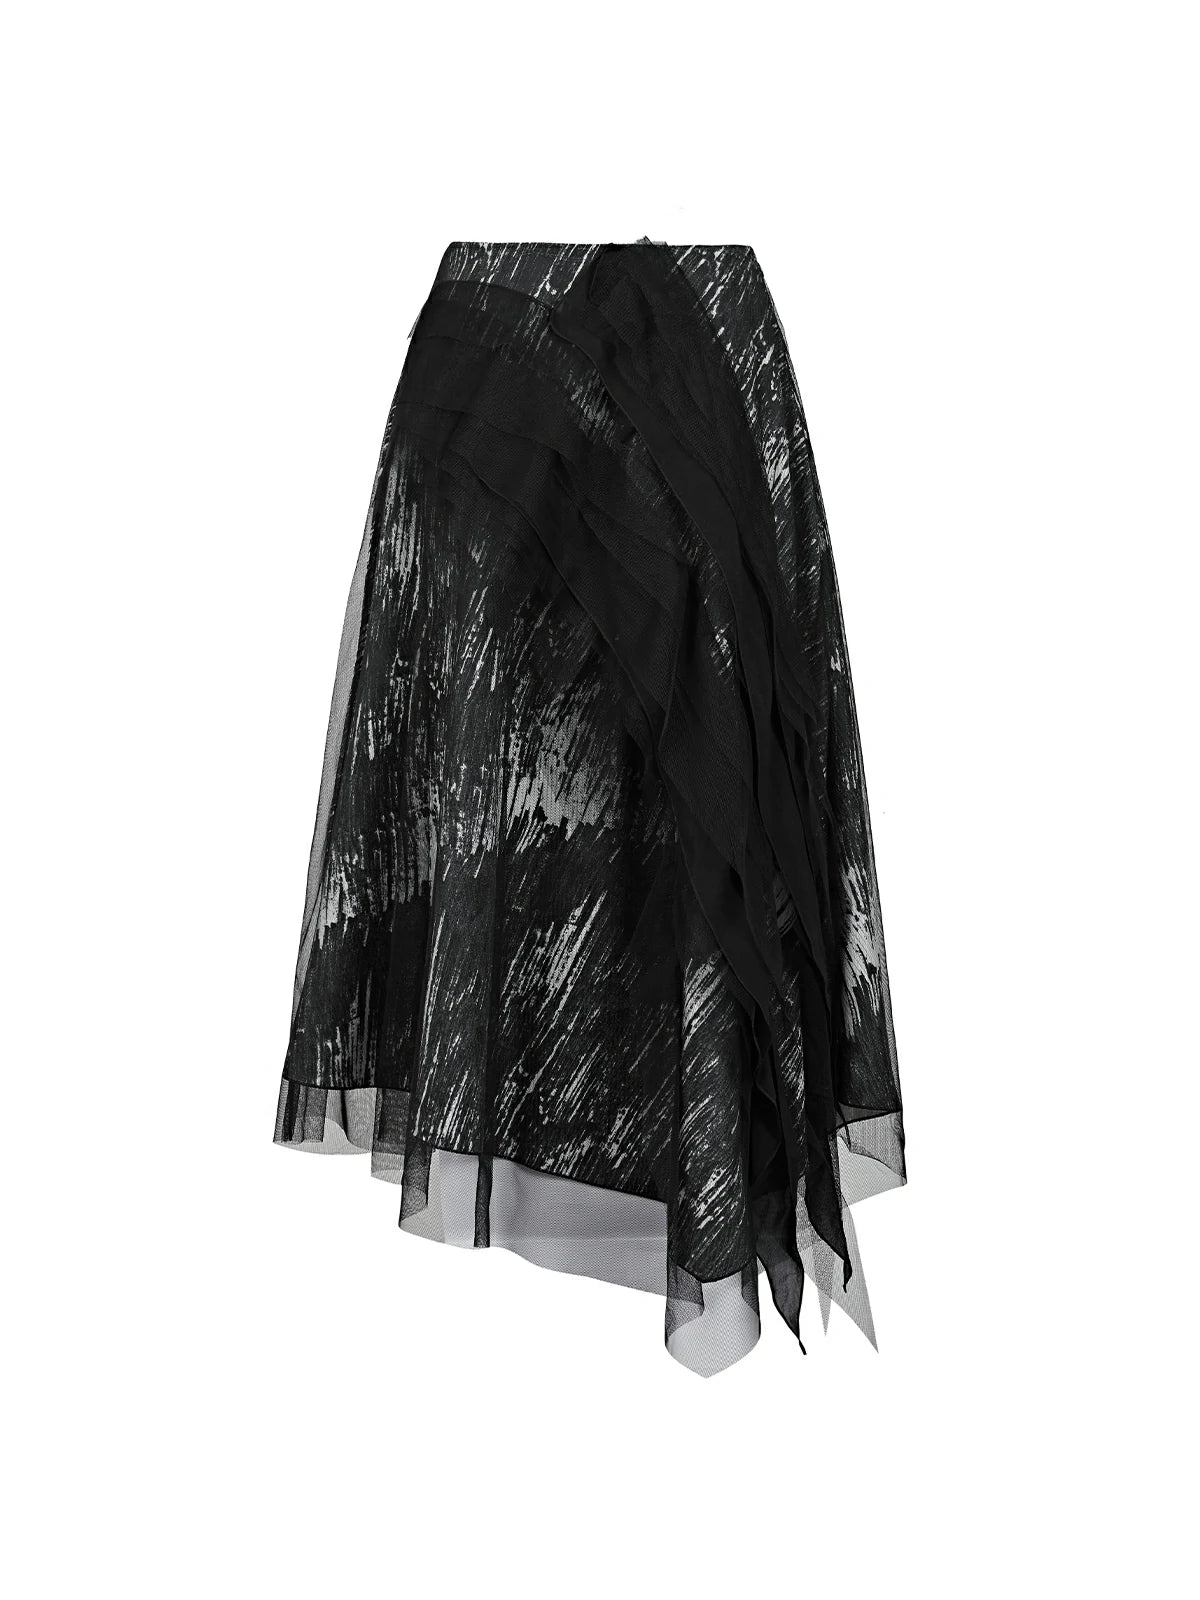 Irregular hem black and white ink painting  A-line midi skirt, featuring an artistic pattern for a modern and comfortable outfit perfect for various occasions.